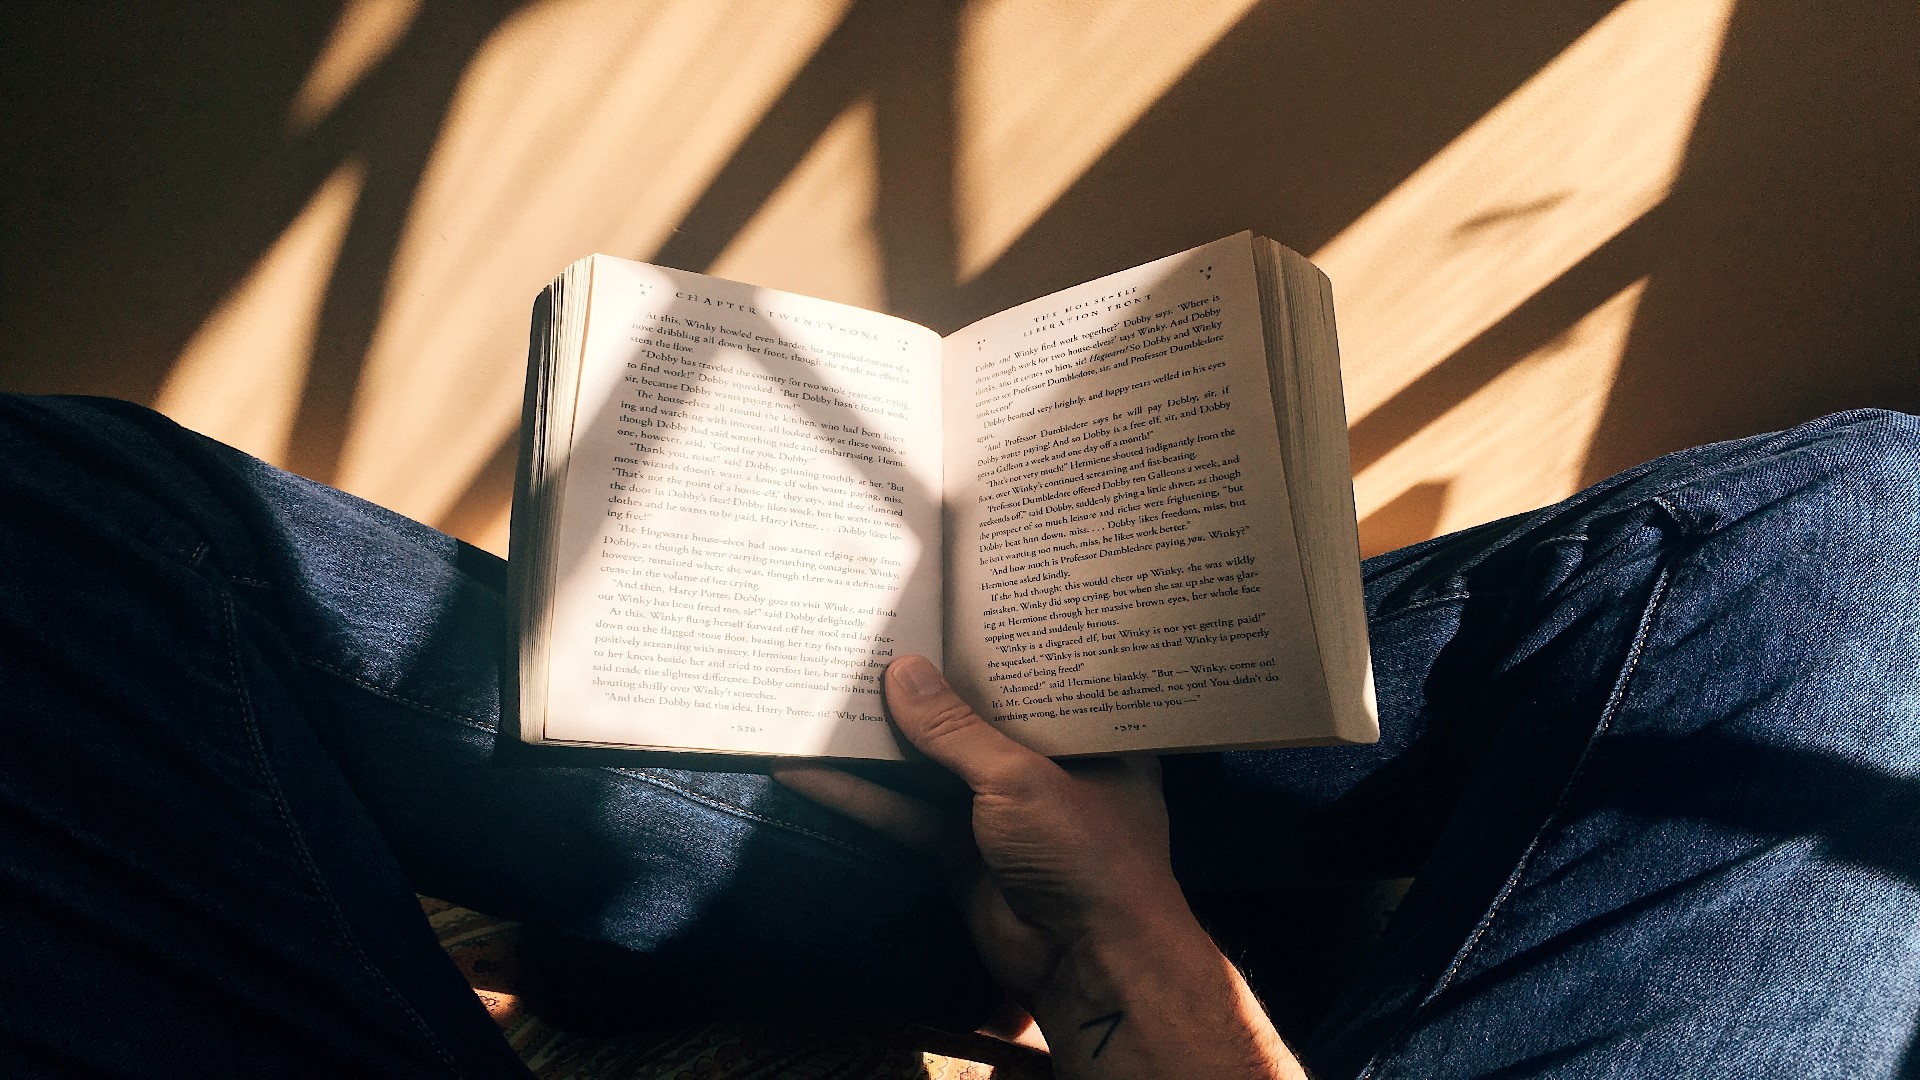 An Image of a person reading a book